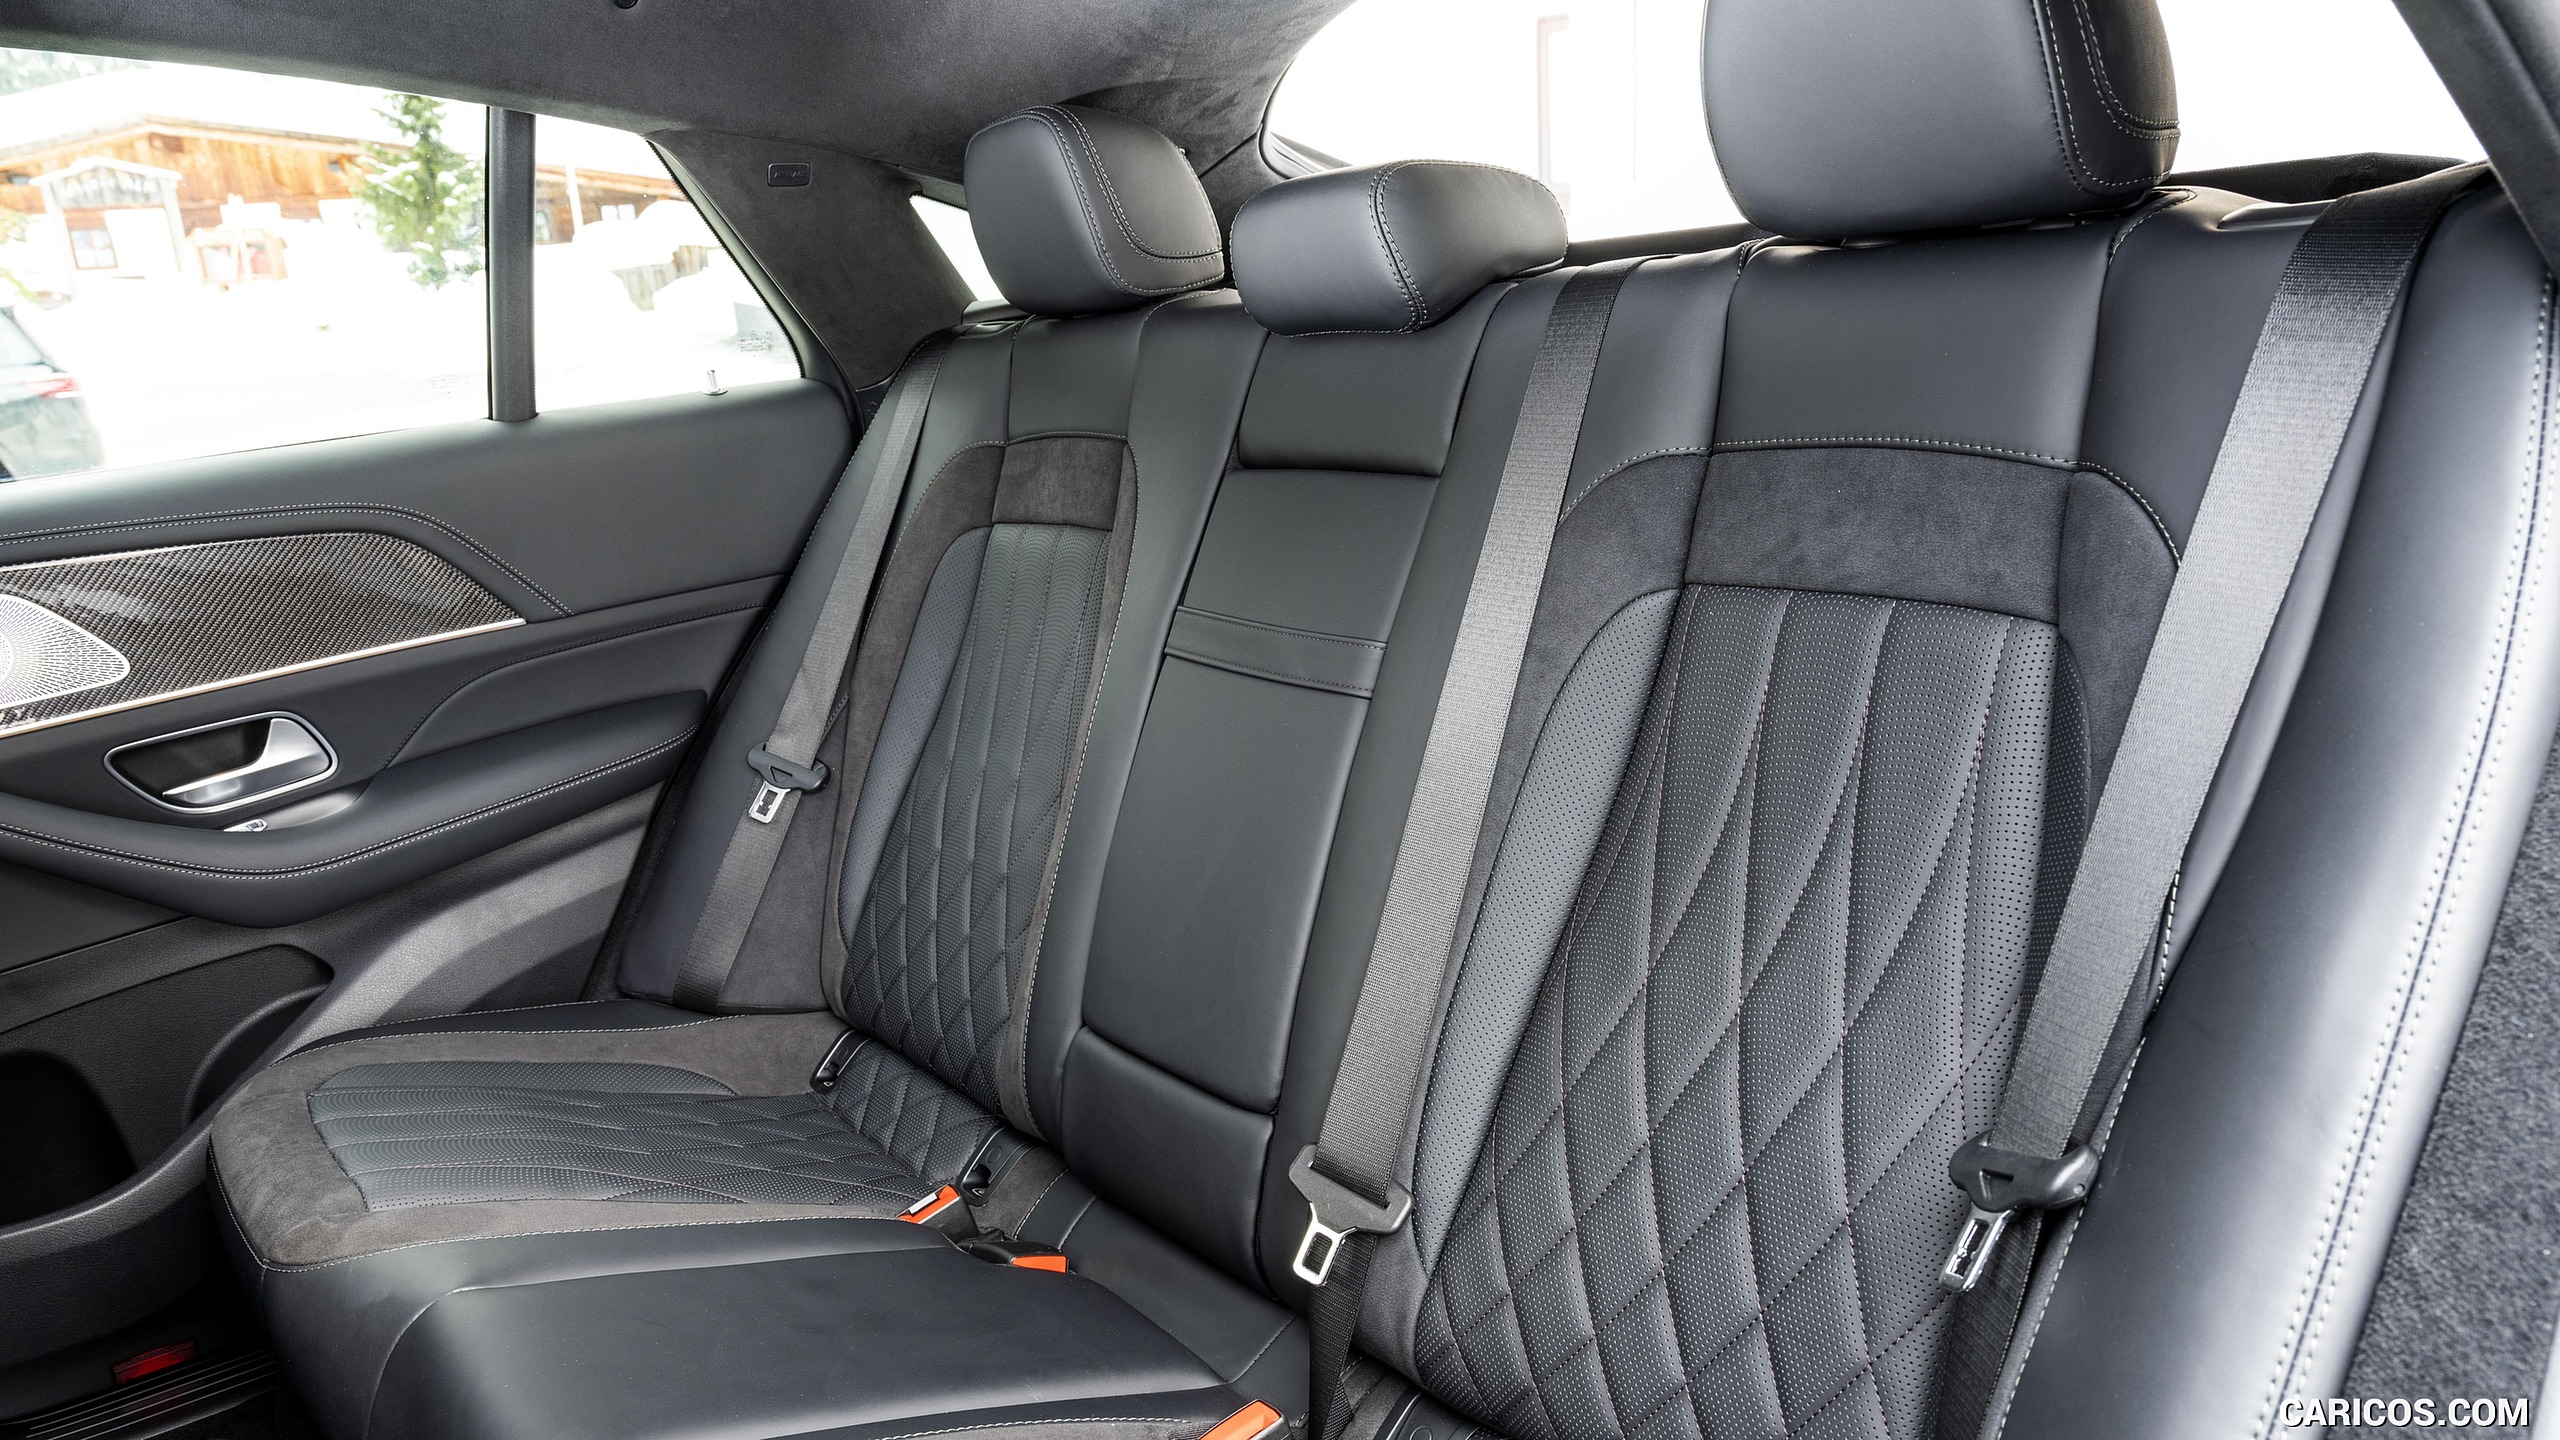 2021 Mercedes-AMG GLE 53 4MATIC Coupe - Interior, Rear Seats, #58 of 178